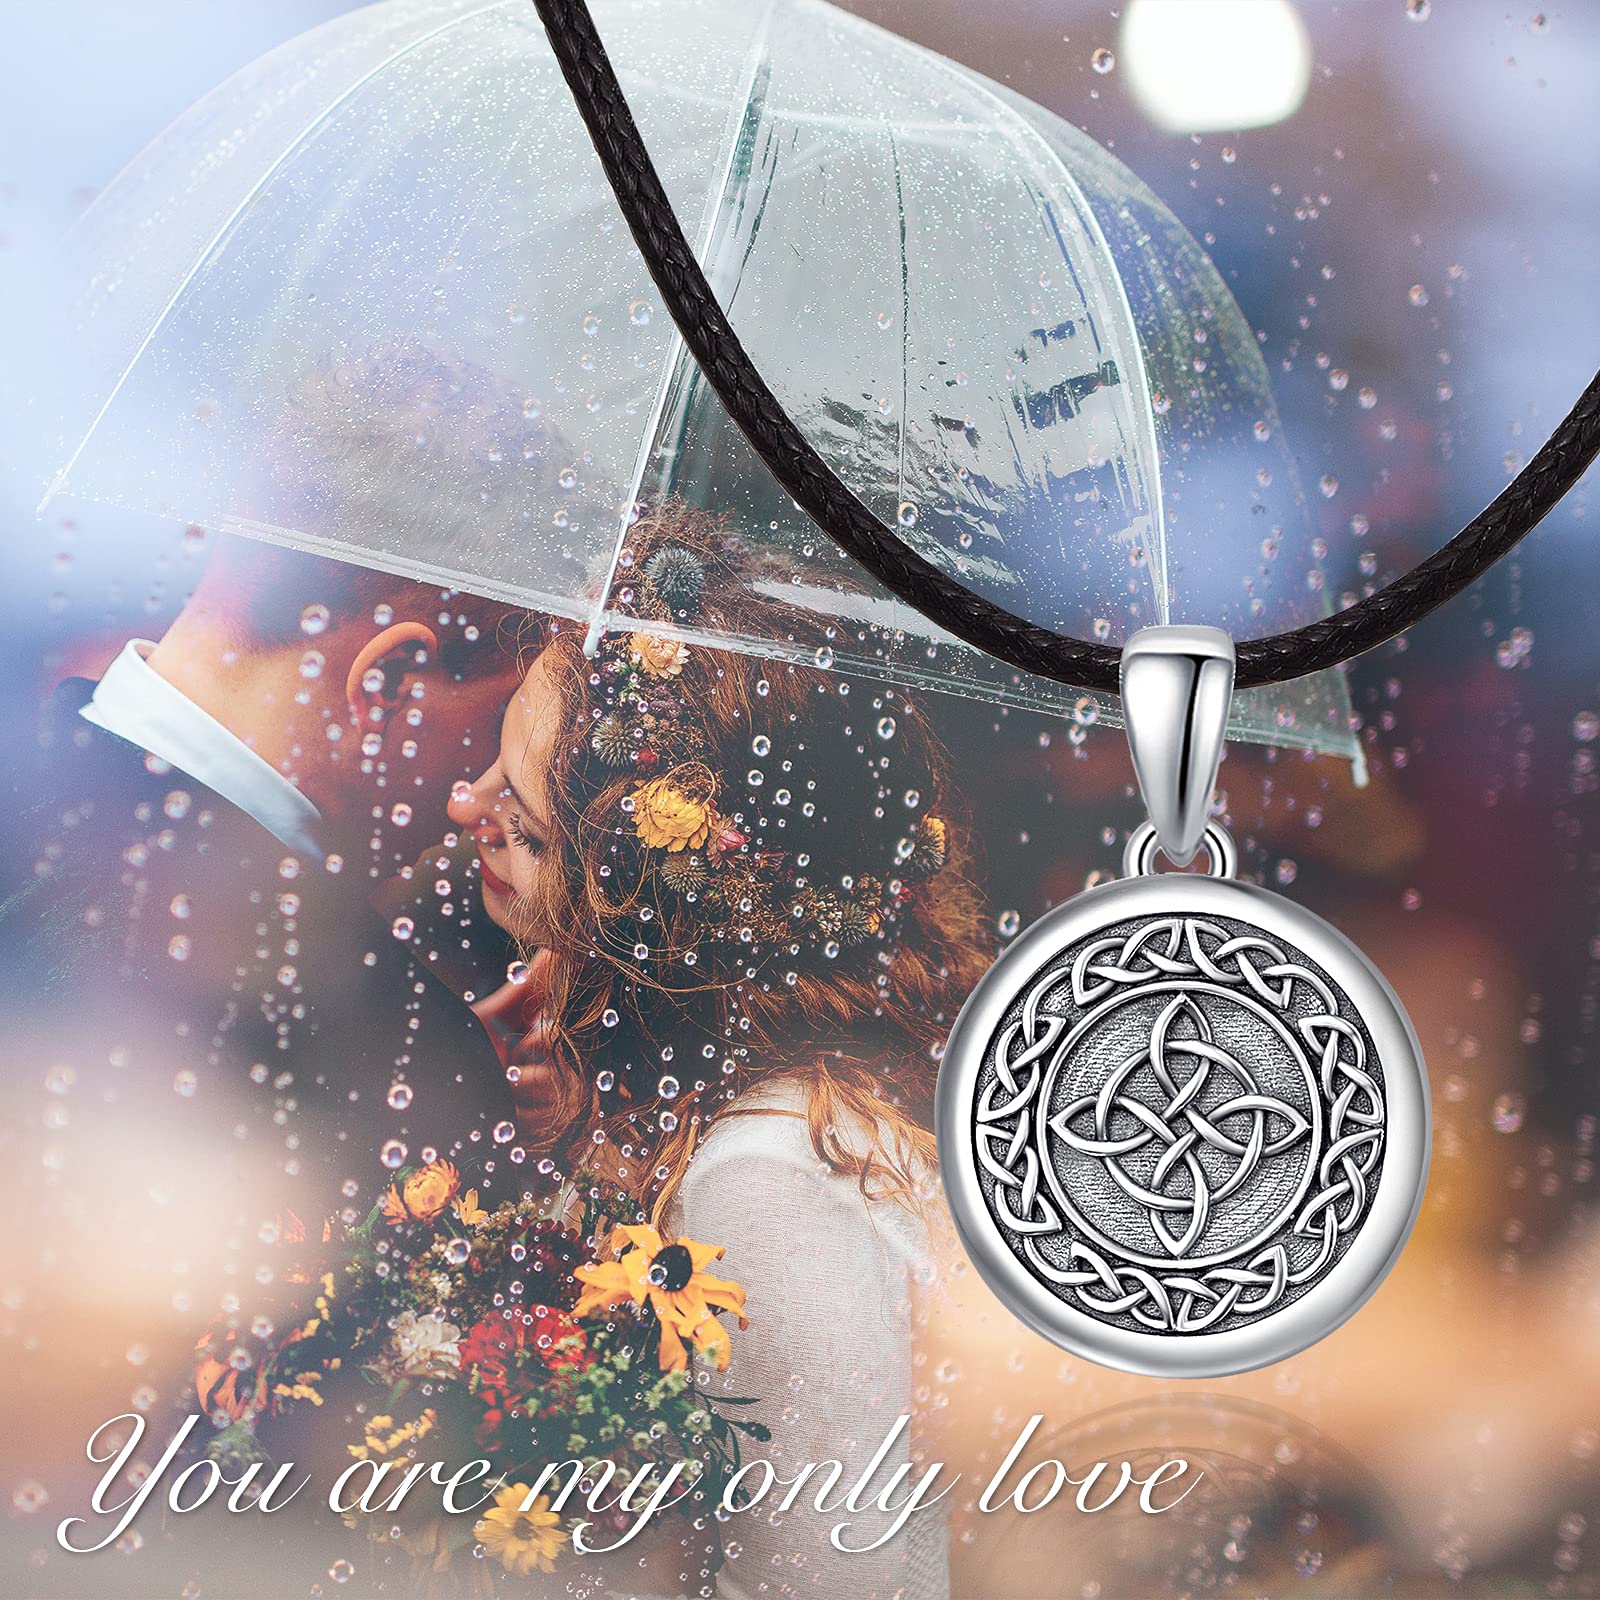 Irish Jewelry for Men Women Girls Locket Necklace Photo Lockets that Hold Picture Personalized Father's Day Gift Dad Custom Celtic Locket Sterling Silver Good Luck Irish Viking Wiccan Jewelry Gifts